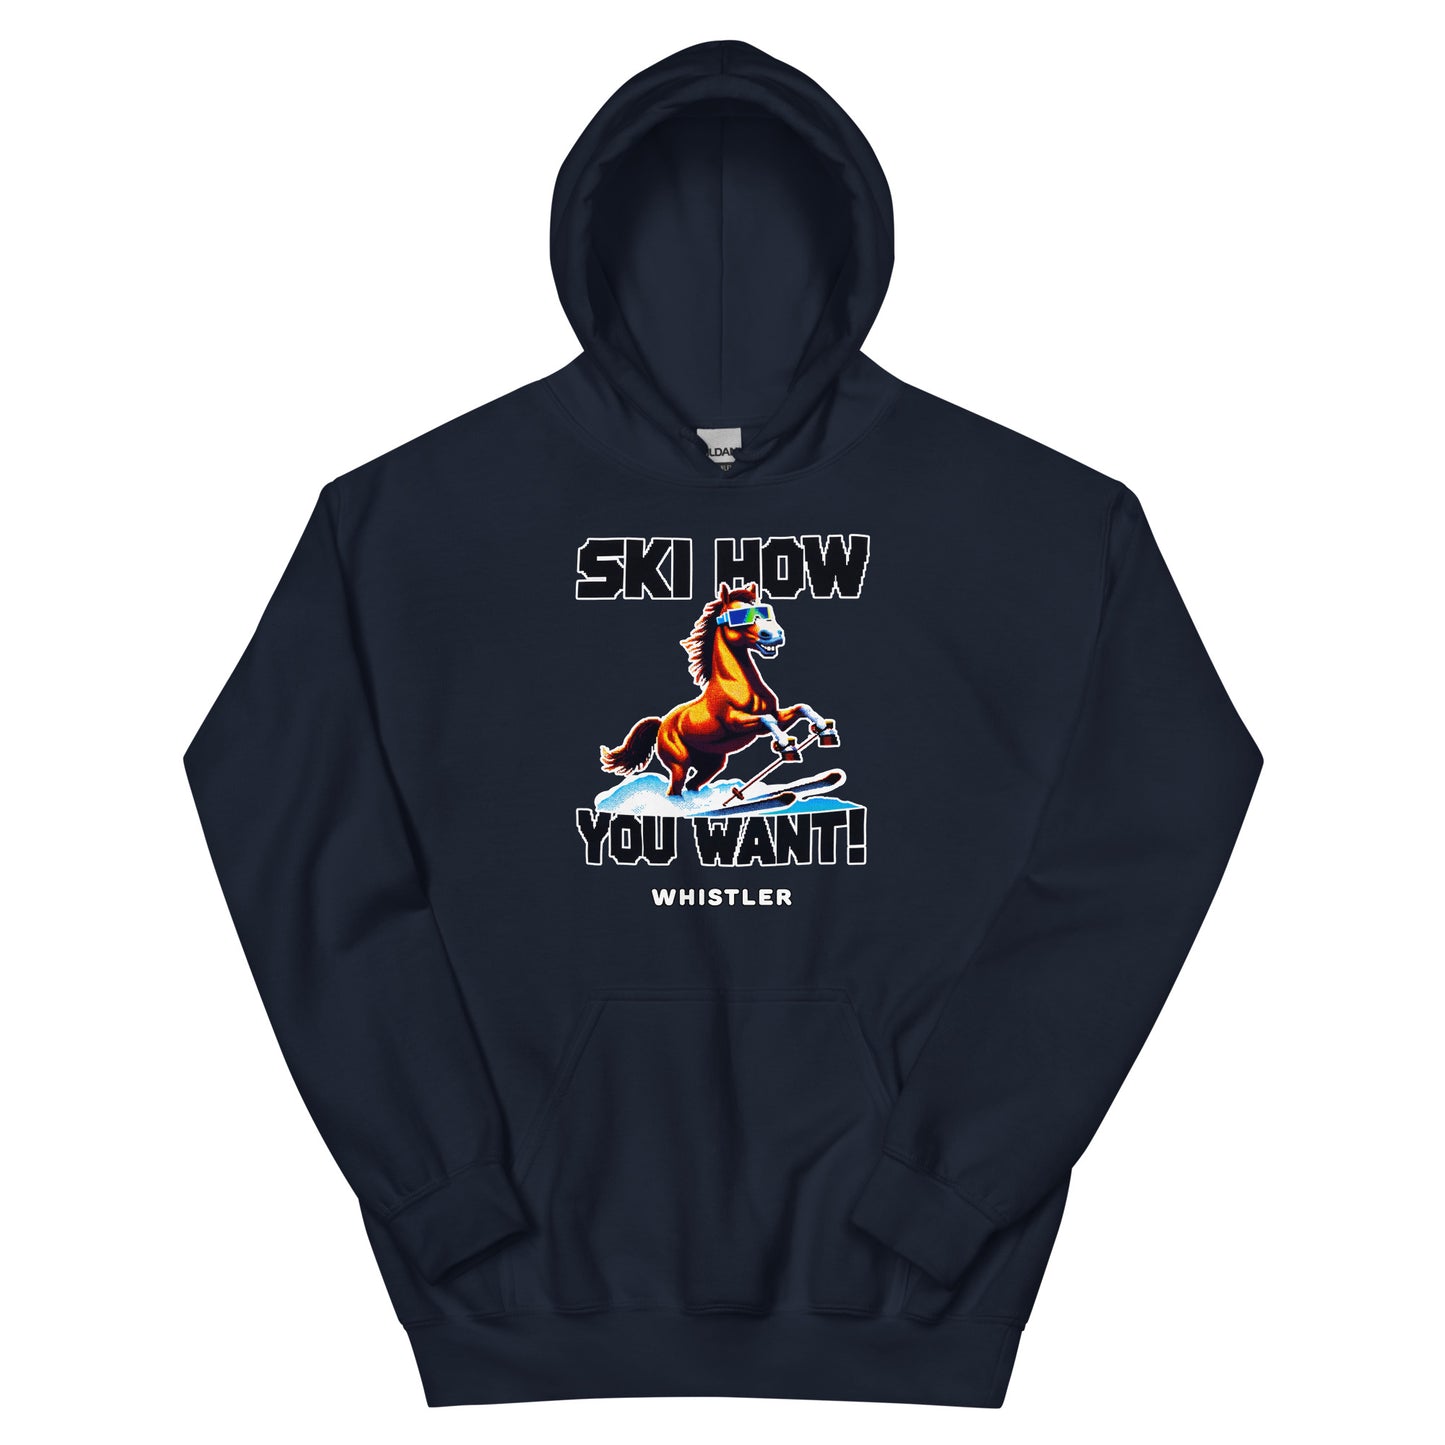 Ski how you want Whistler horse skiing printed hoodie by Whistler Shirts